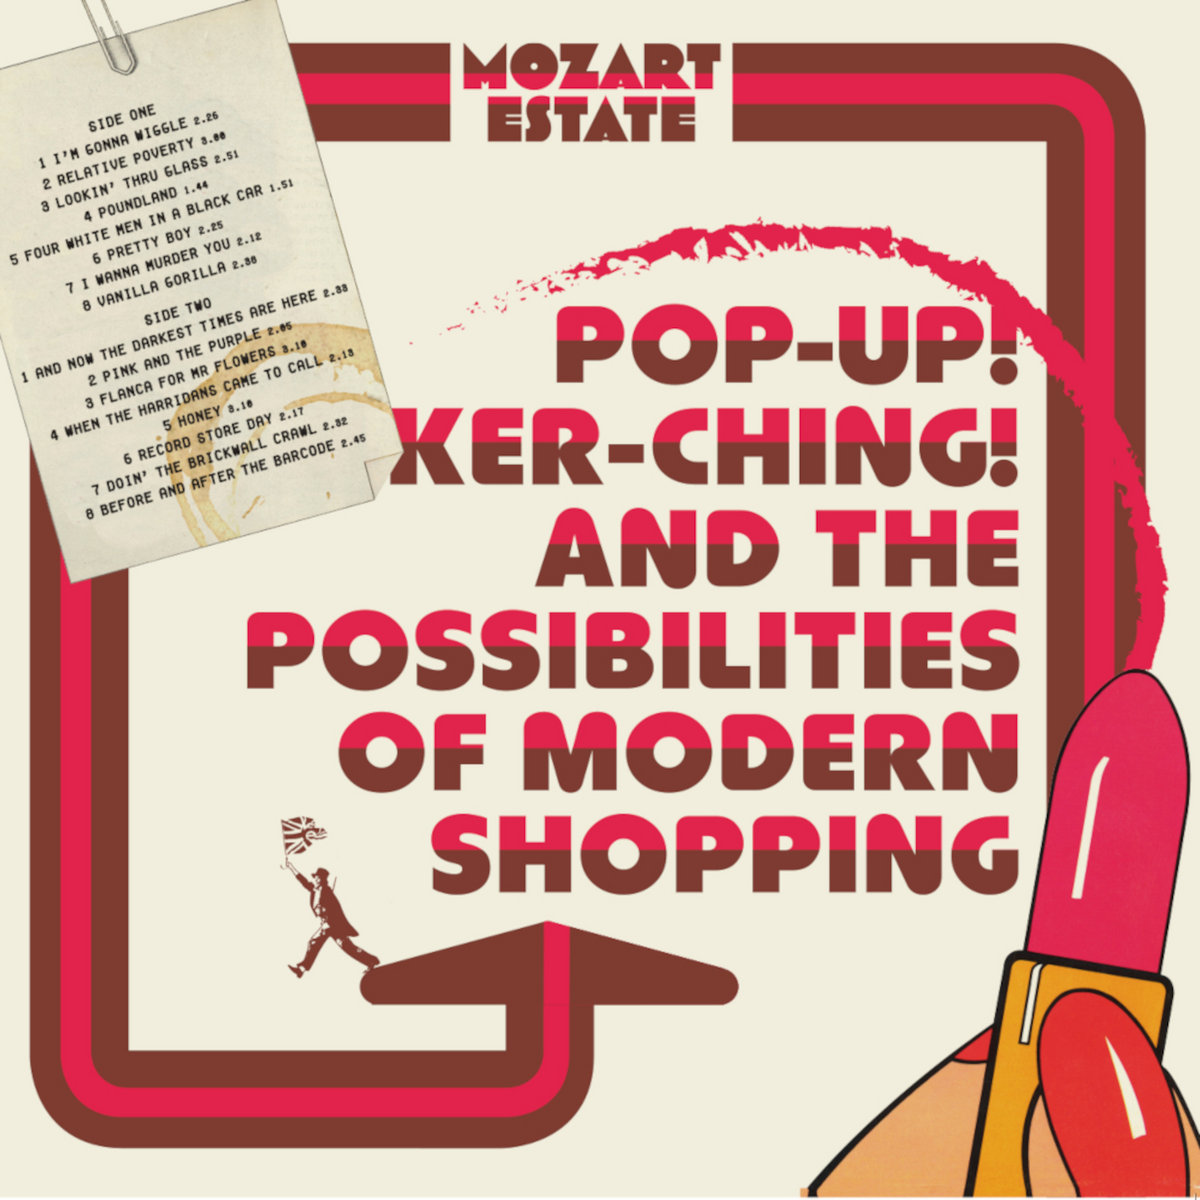 Mozart-Estate-–-Pop-Up-Ker-ching-and-The-Possibilities-of-Modern-Shopping Mozart Estate – Pop-Up! Ker-ching! and The Possibilities of Modern Shopping